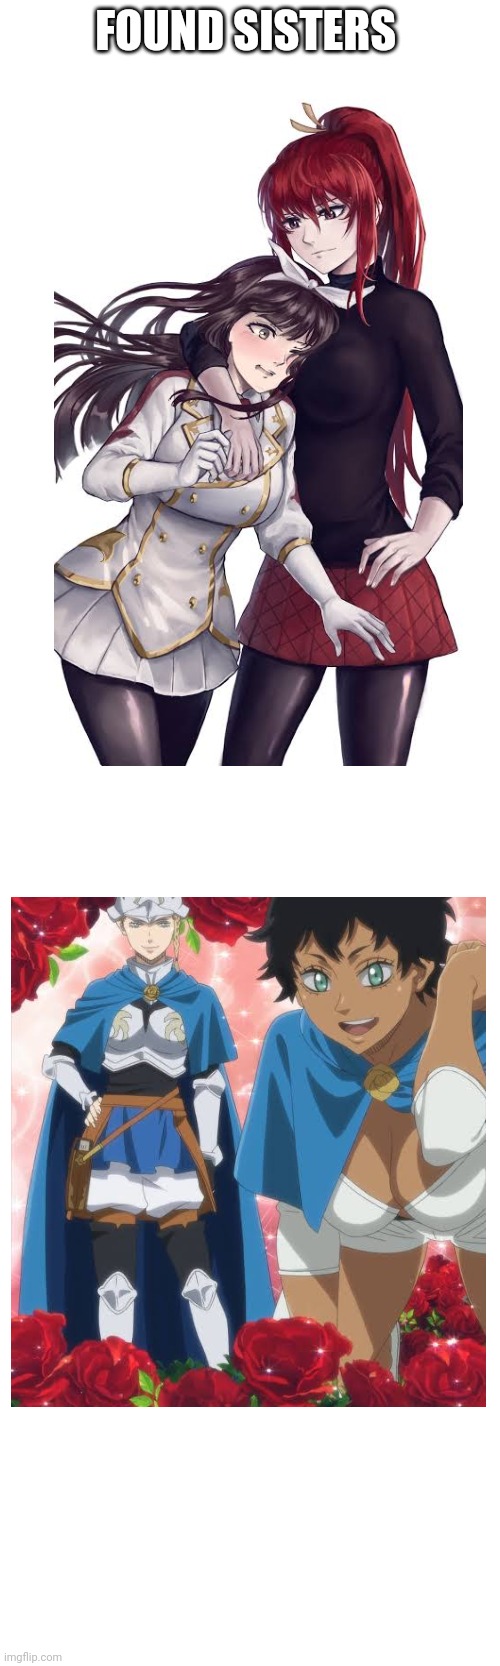 Found sisters | FOUND SISTERS | image tagged in anime girl,fairy tail,black clover | made w/ Imgflip meme maker